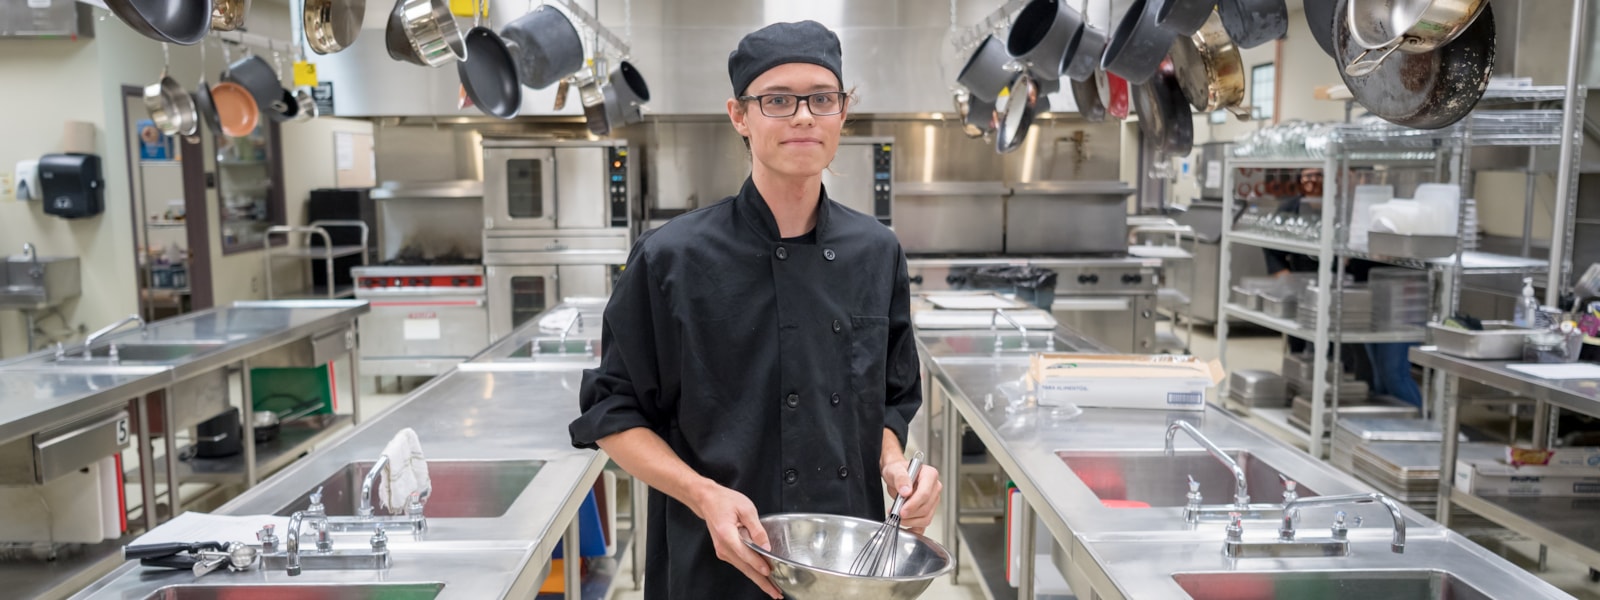 Student holding a mixing bowl and wisk